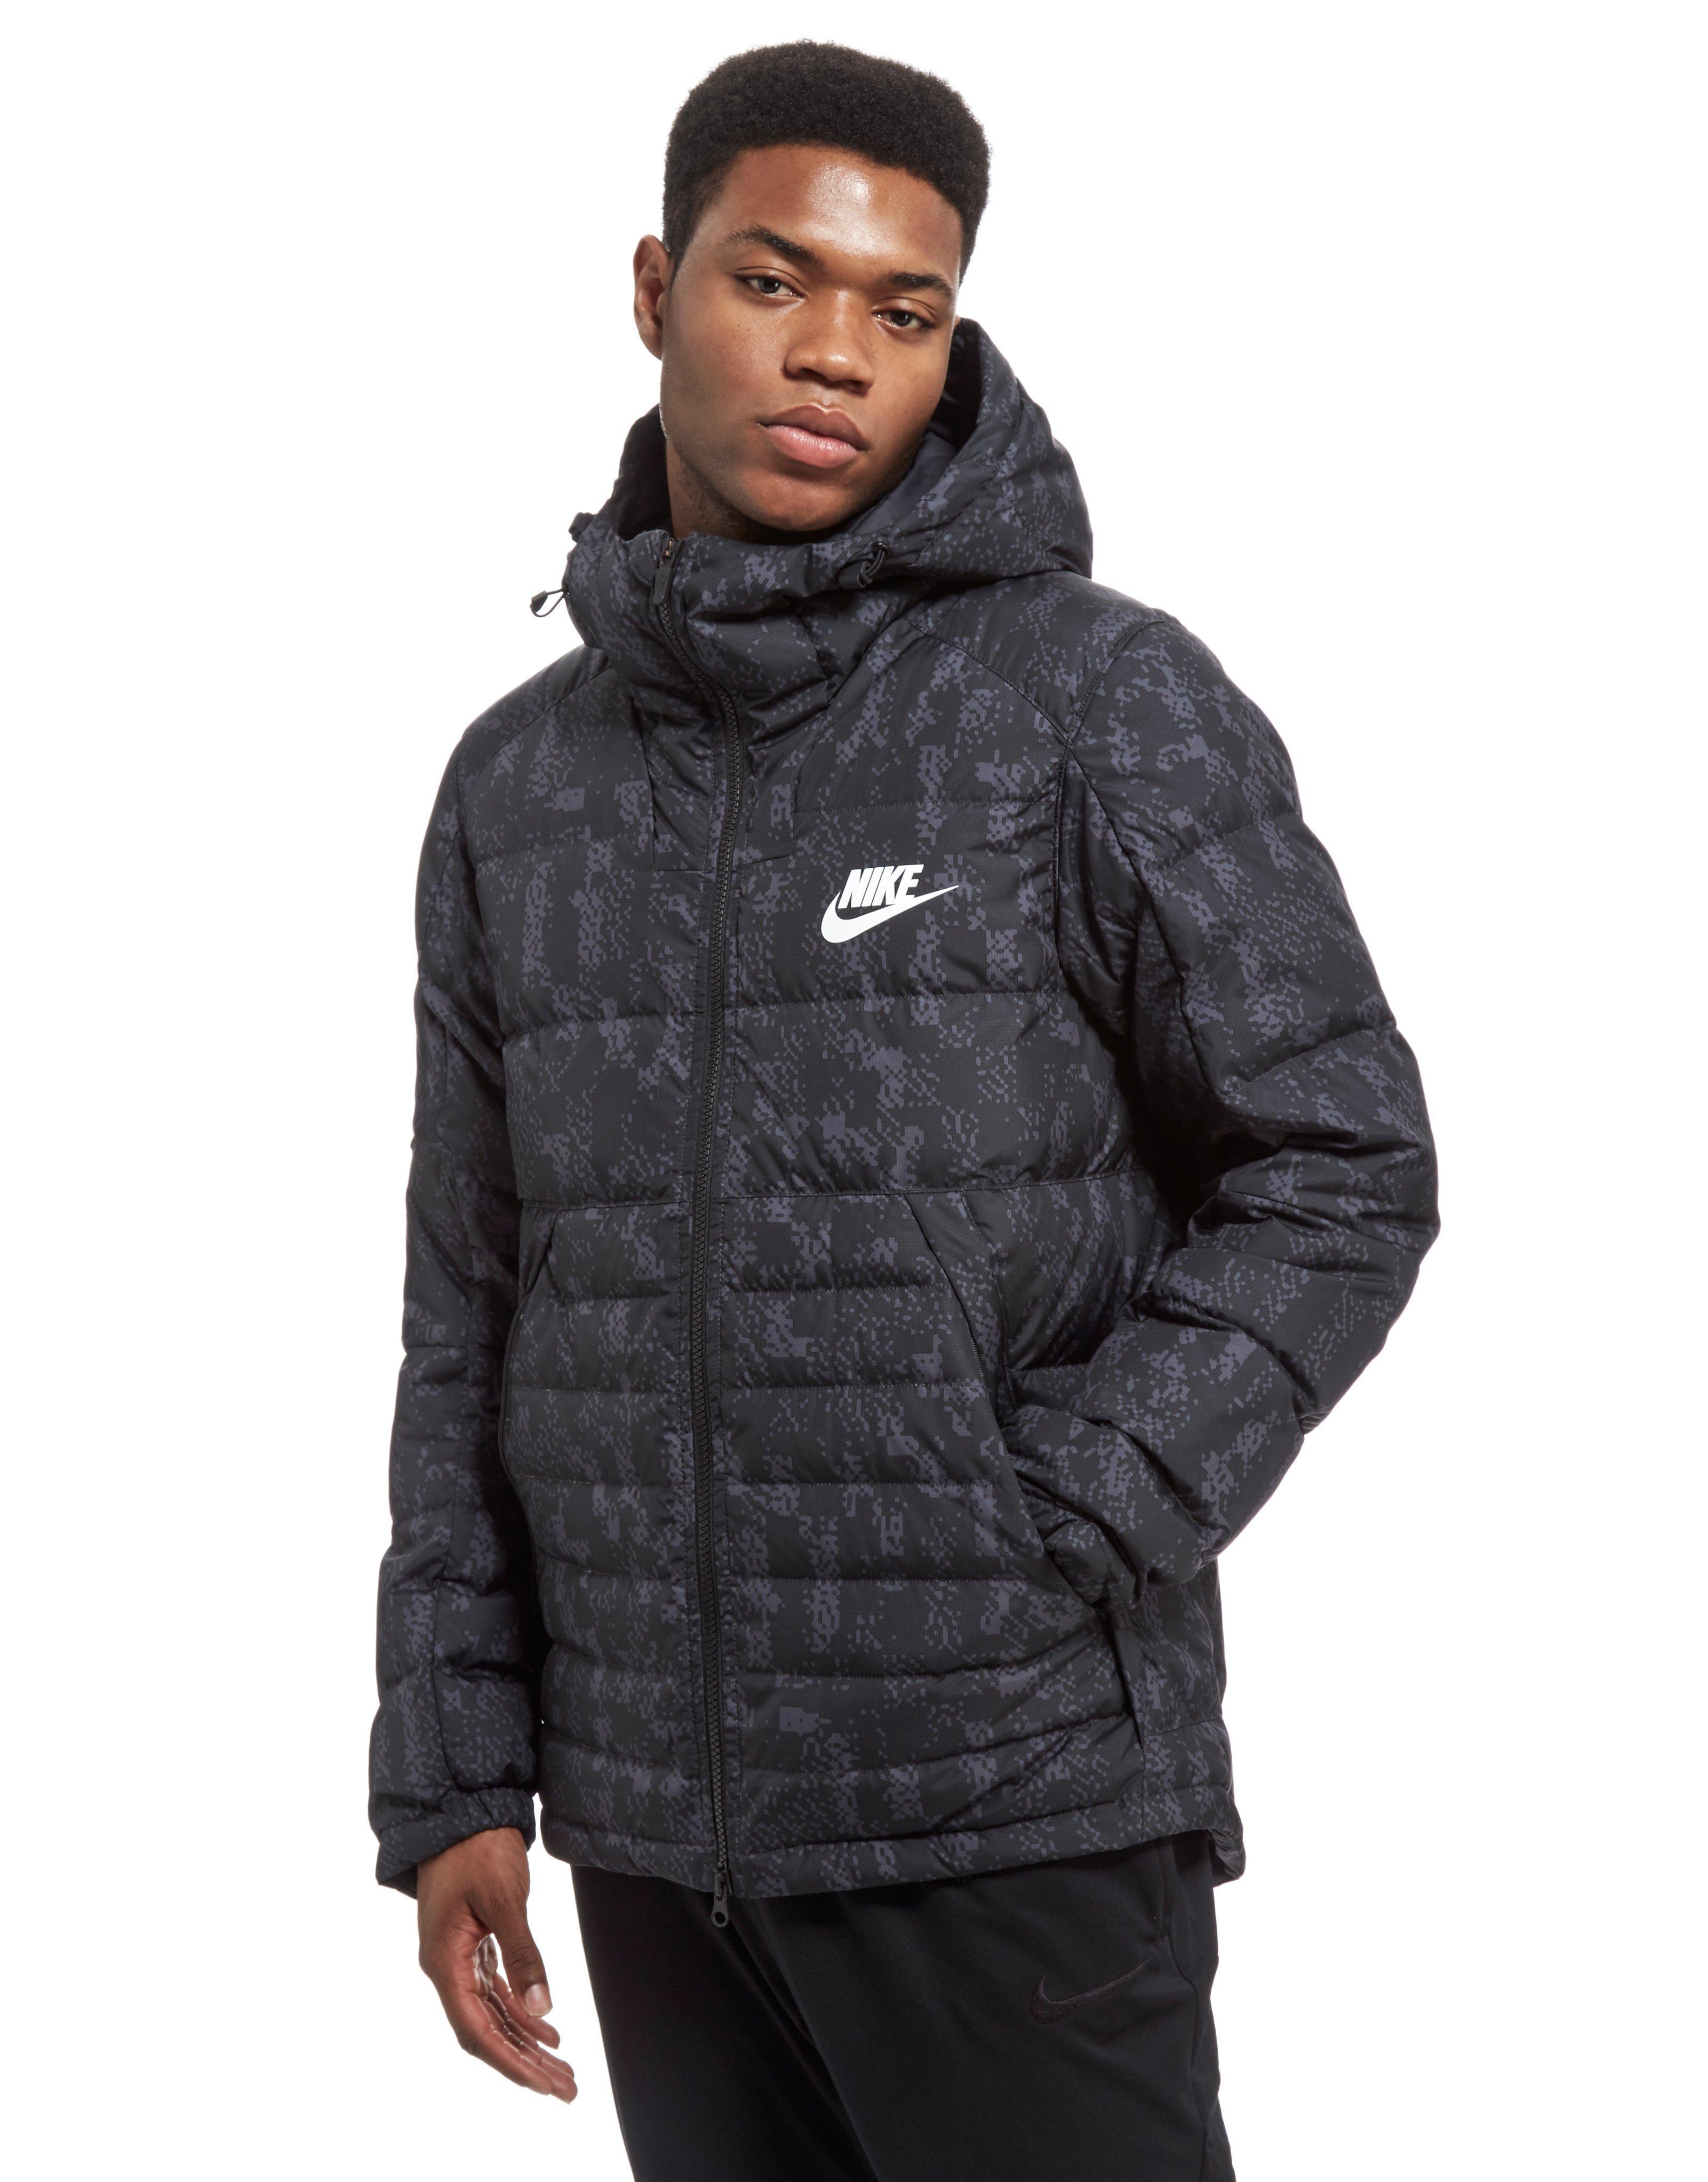 Lyst - Nike Printed Down Fill Hooded Jacket in Black for Men